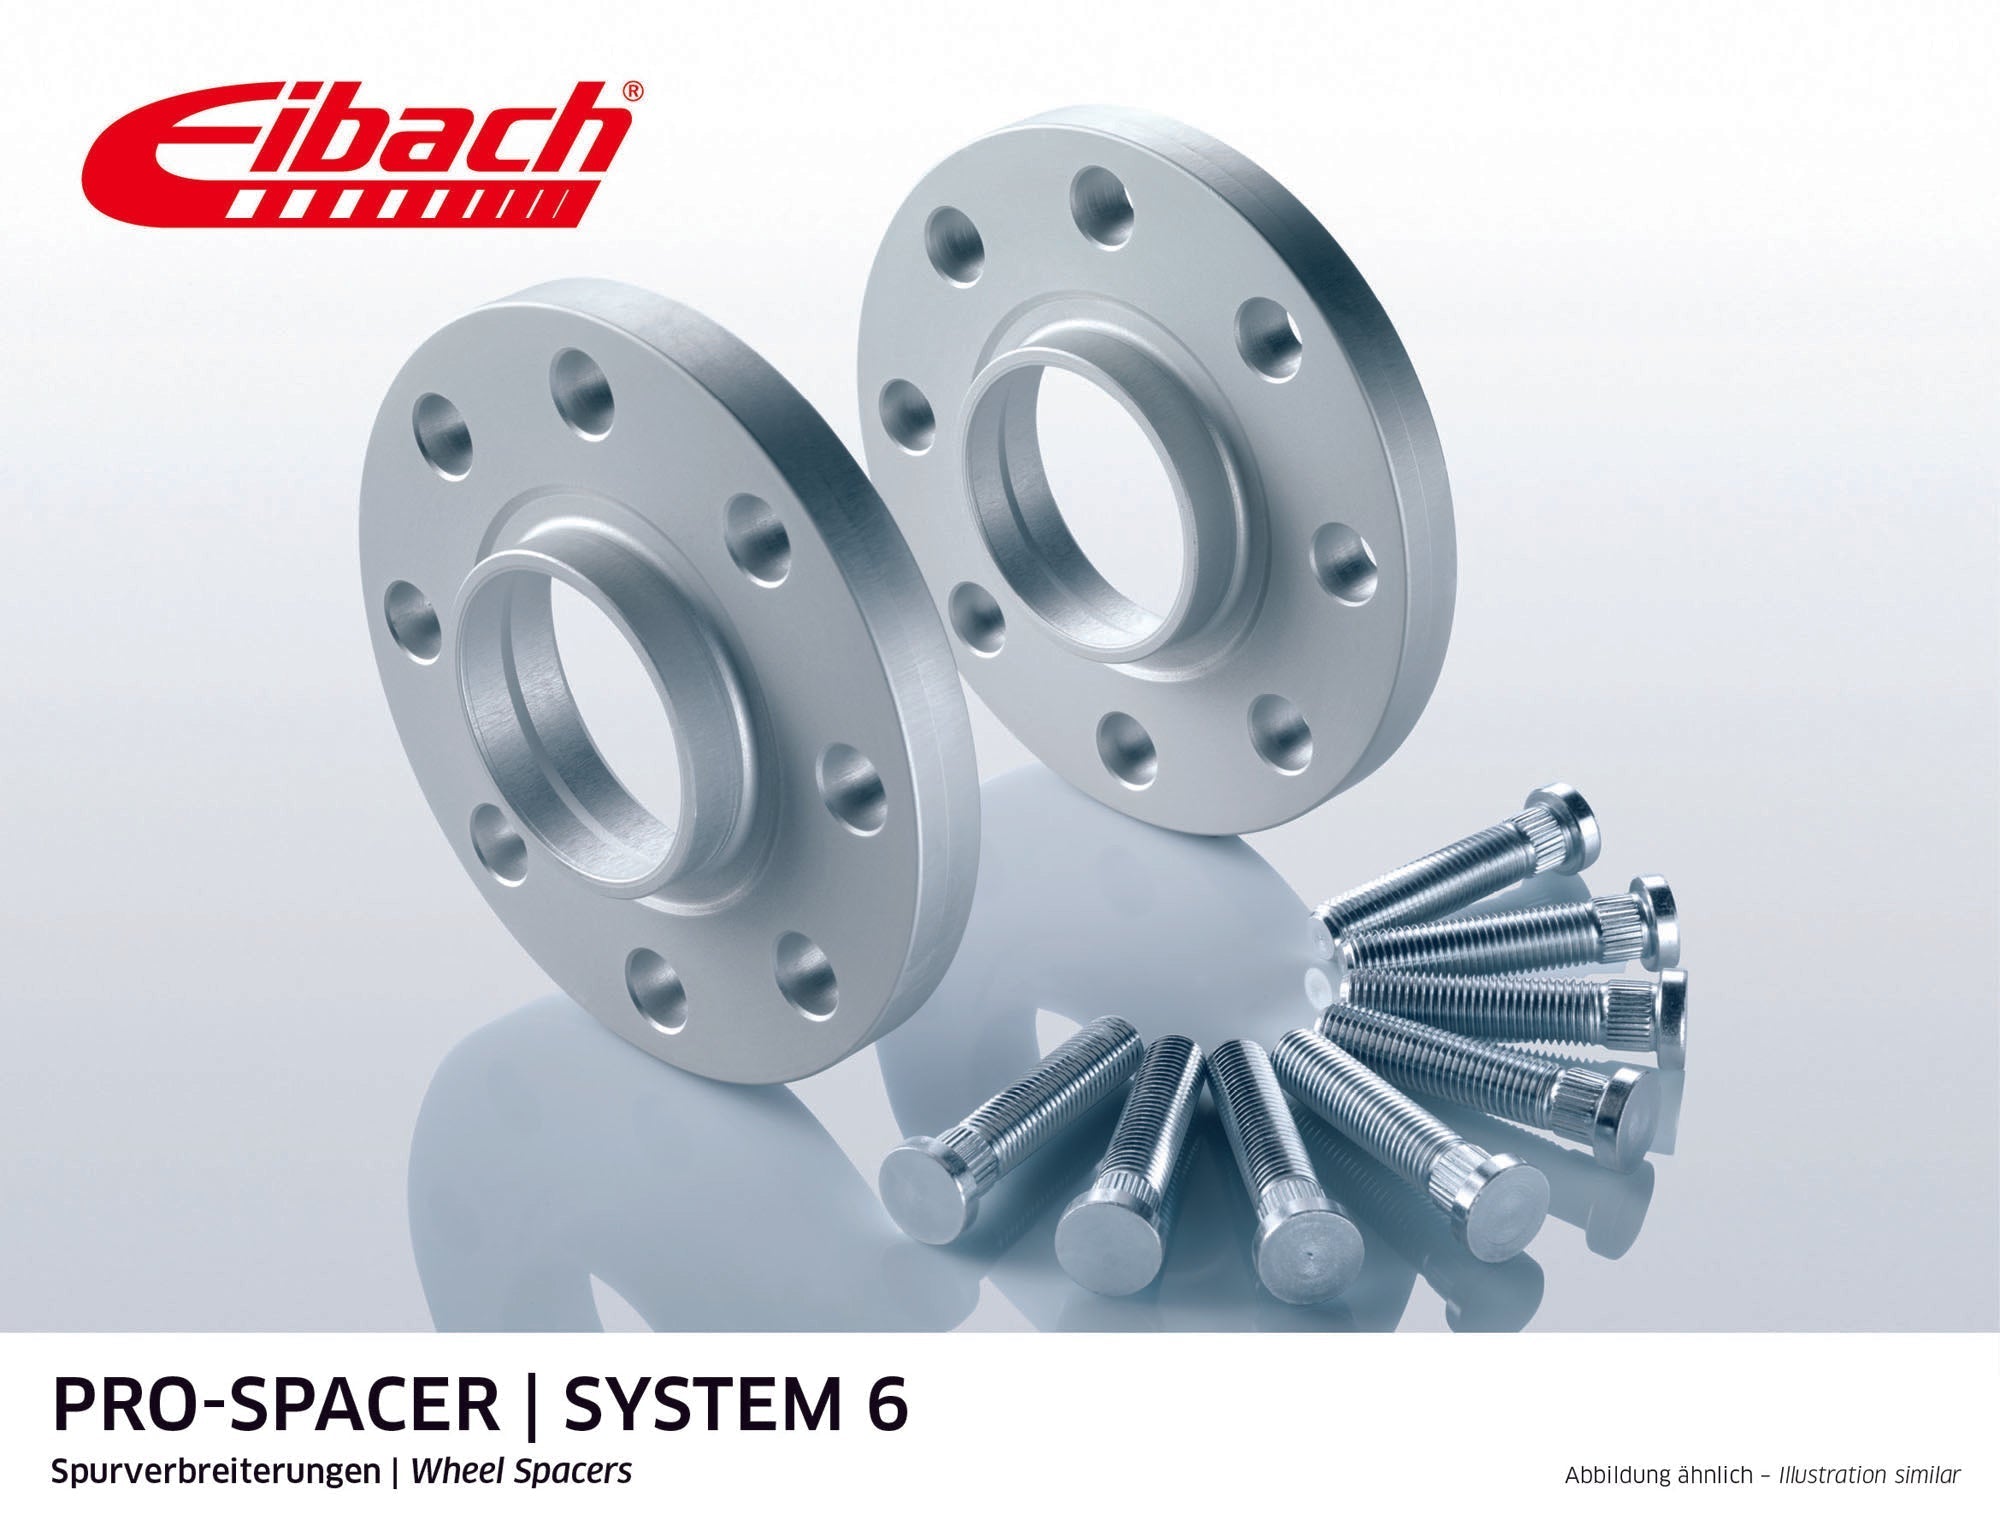 Eibach 18mm Pro-Spacer - Silver Anodized Wheel Spacer 944 1981-91 #S90-6-18-001